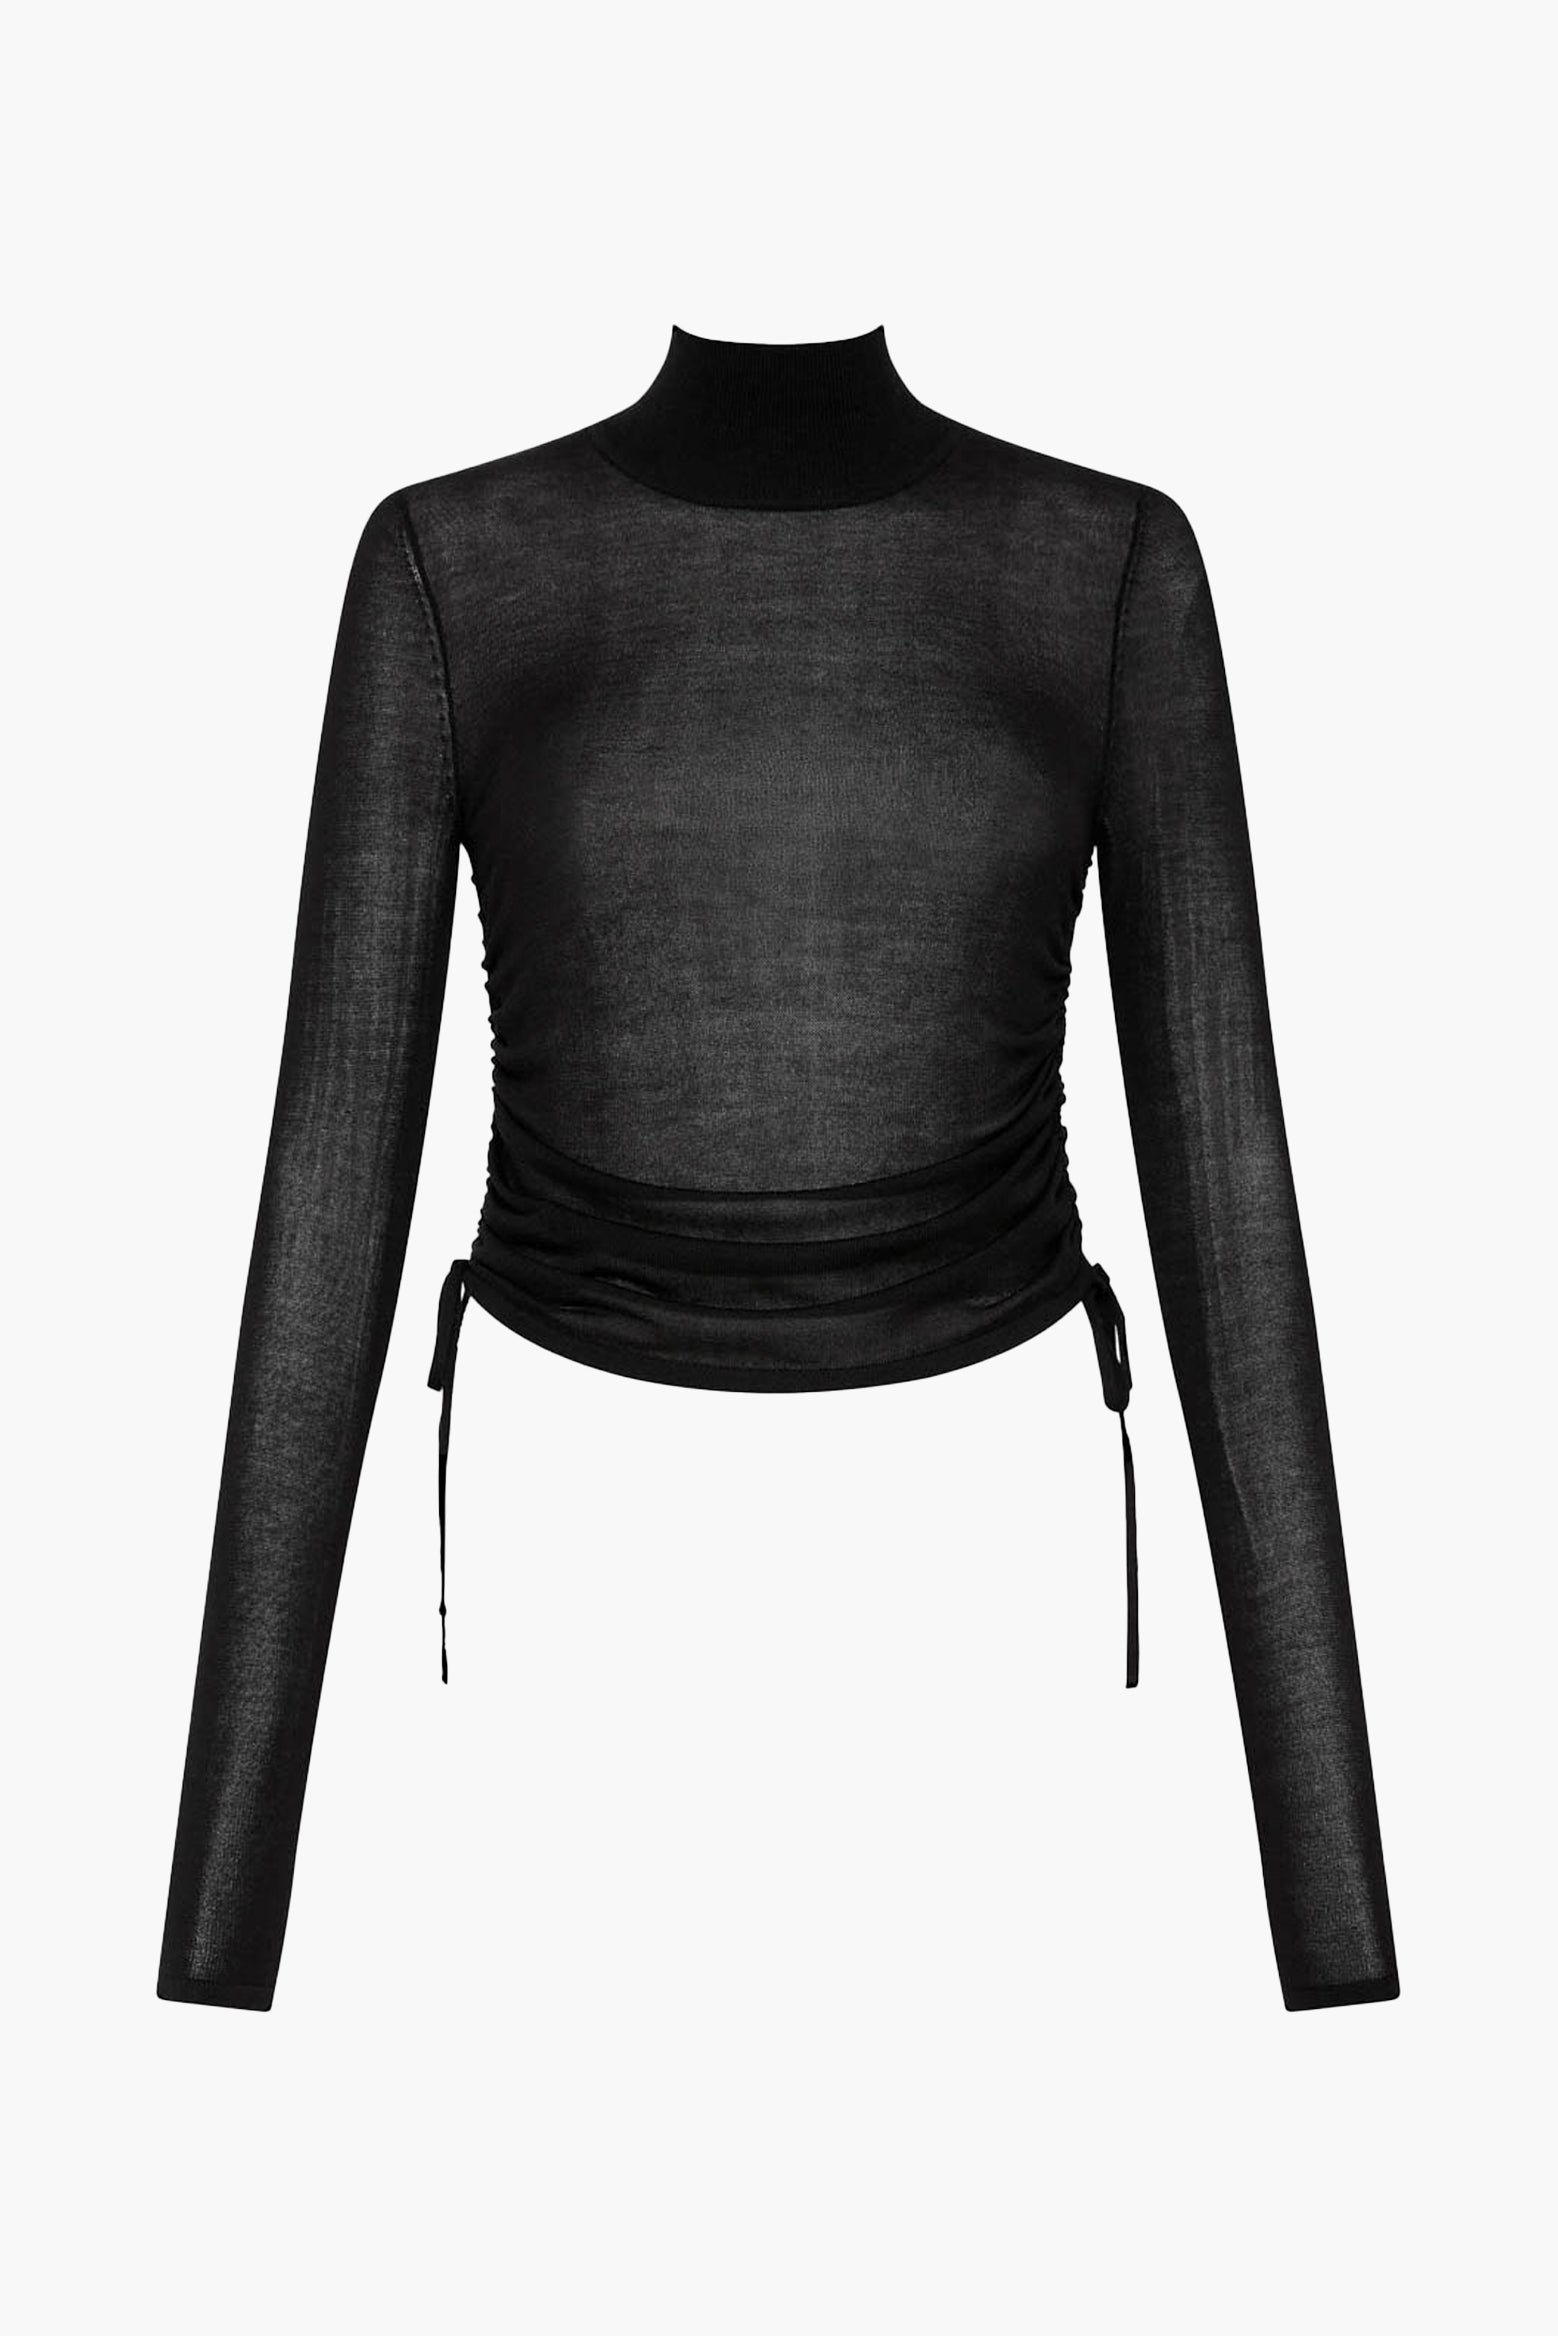 St Agni Sheer Ruched Top in Black available at The New Trend Australia. 